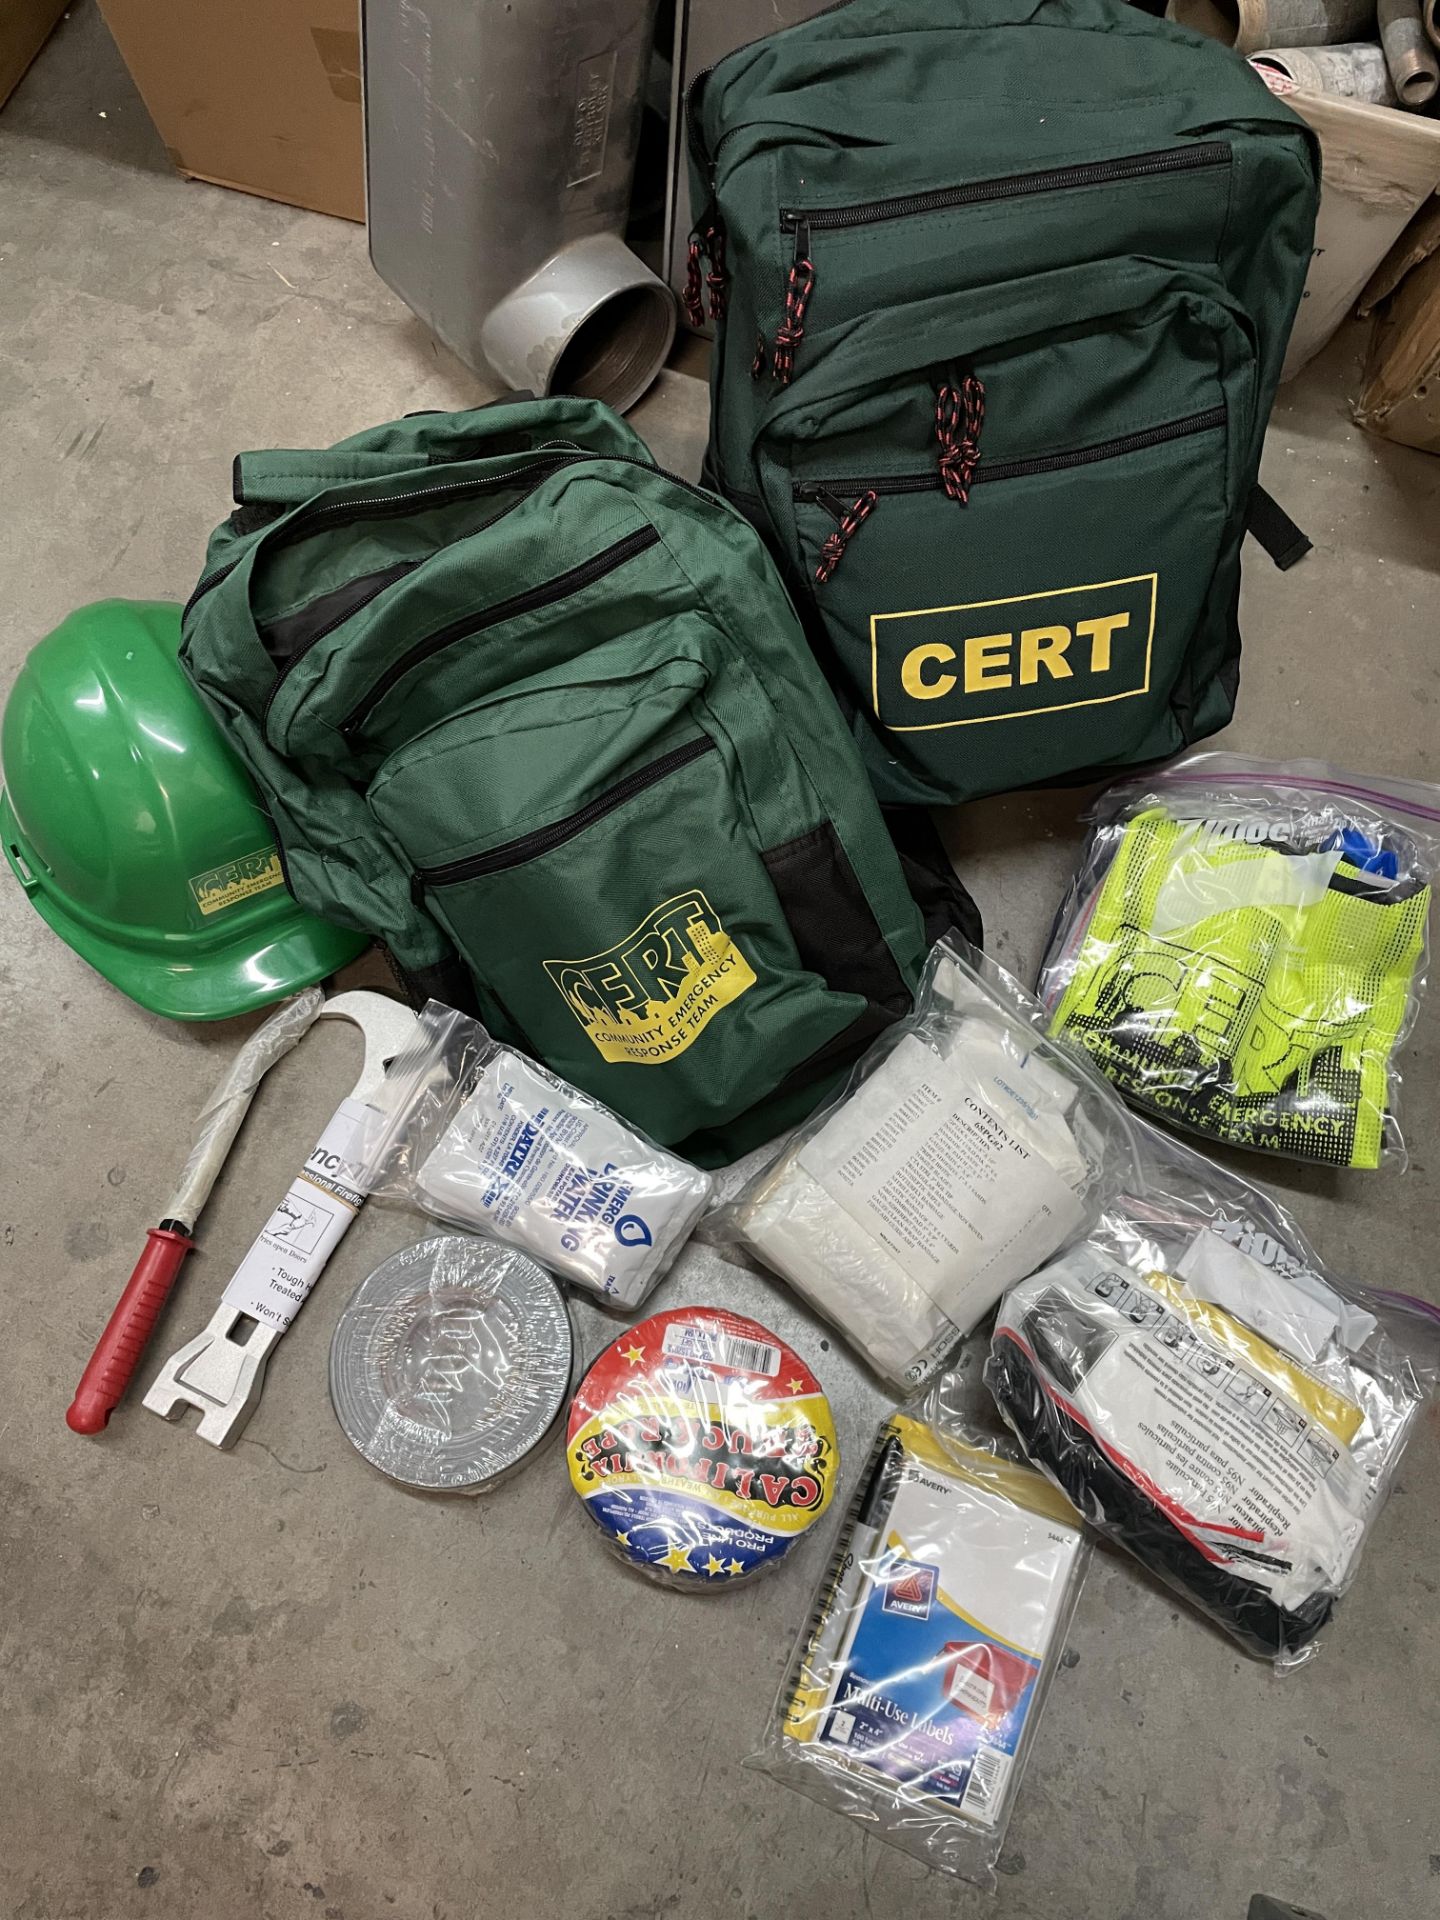 2x CERT Community Emergency Response Team Backpacks with emergency essentials and hard hats - Image 3 of 8